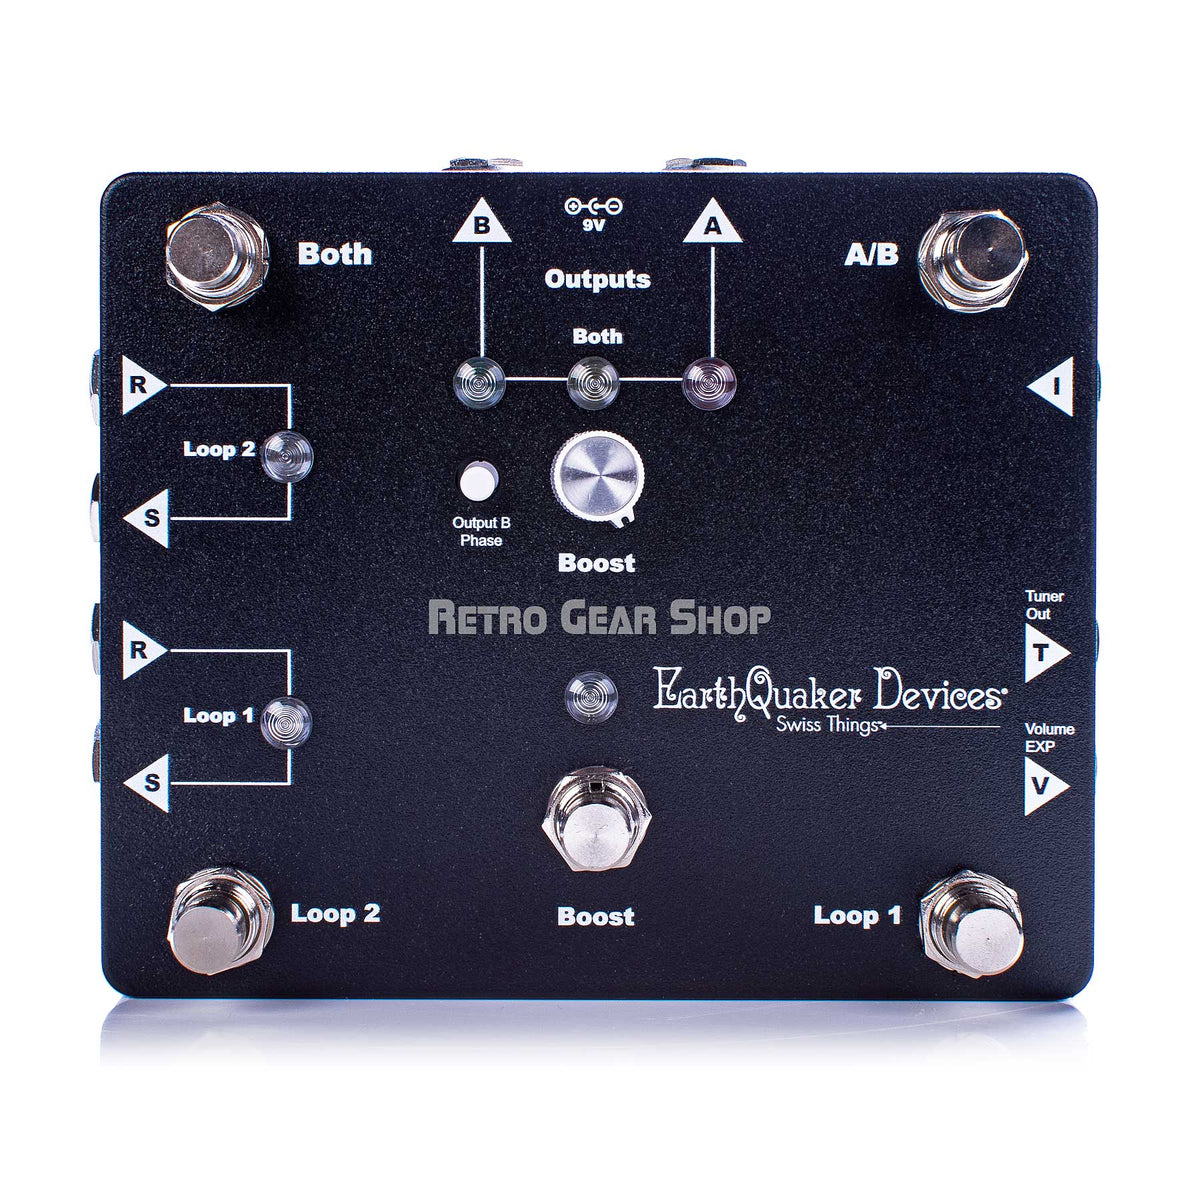 EarthQuaker Devices Swiss Things スイッチャー - エフェクター